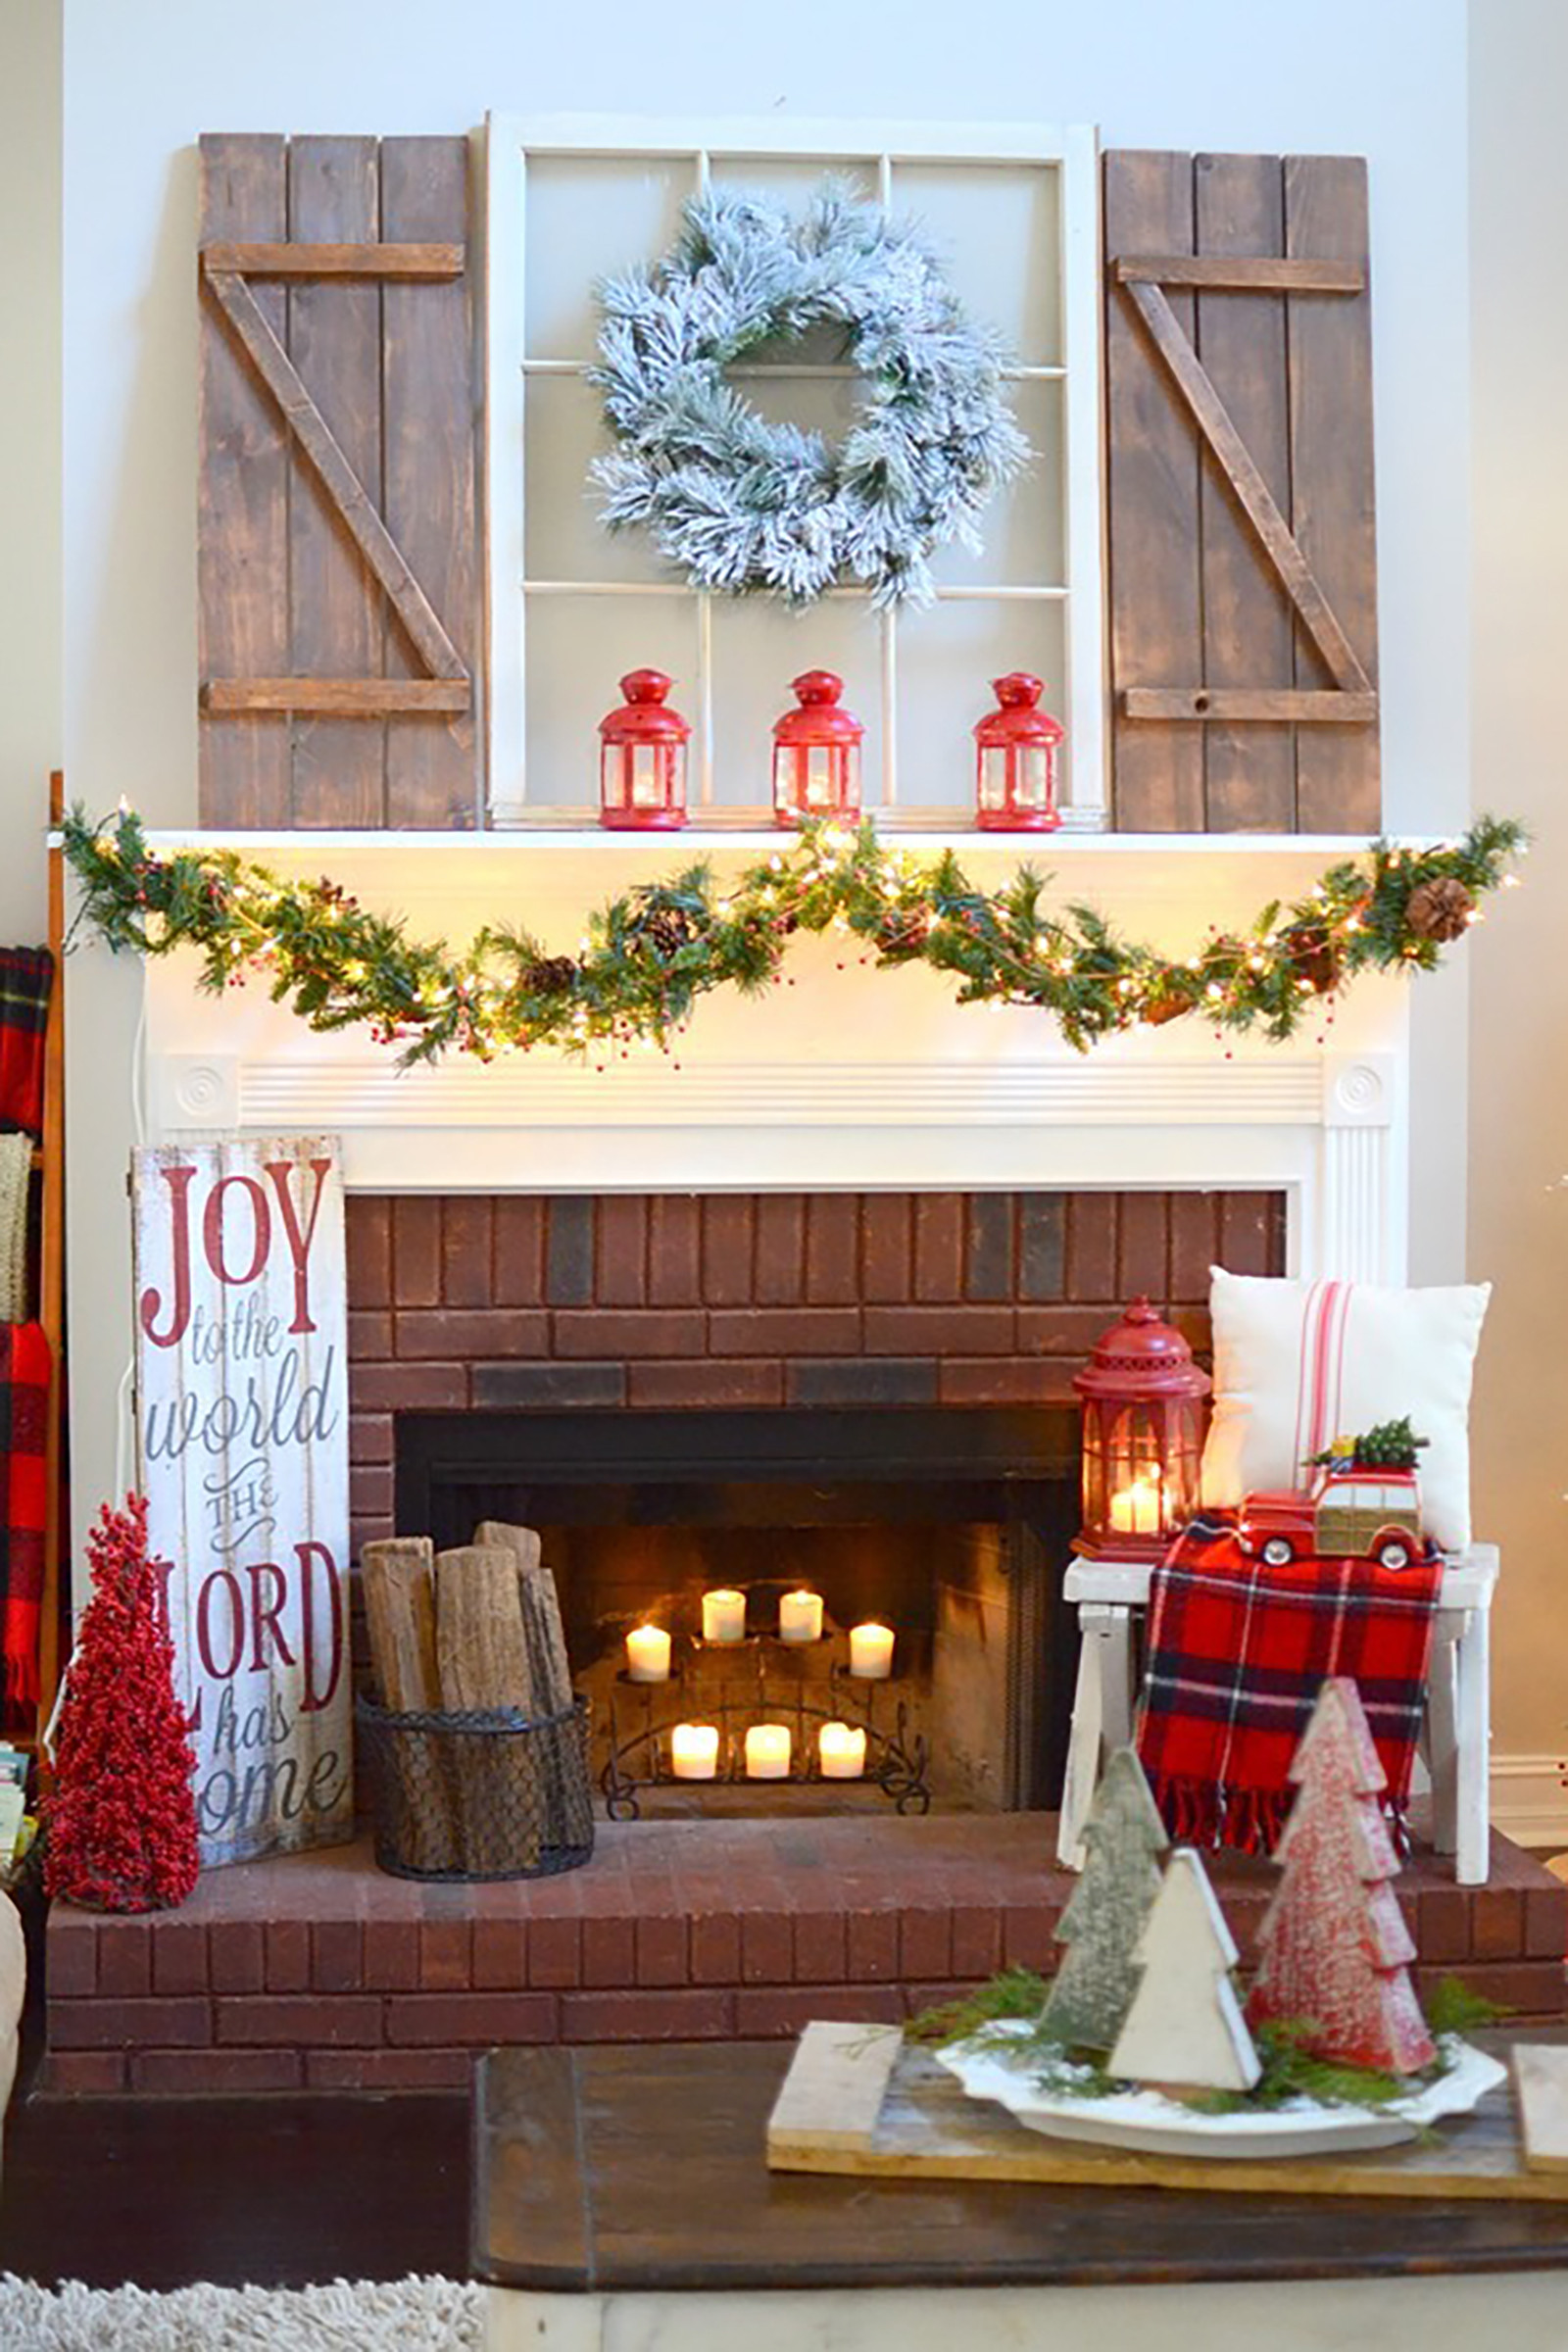 Christmas Fireplace Mantle Decorations
 35 Christmas Mantel Decorations Ideas for Holiday